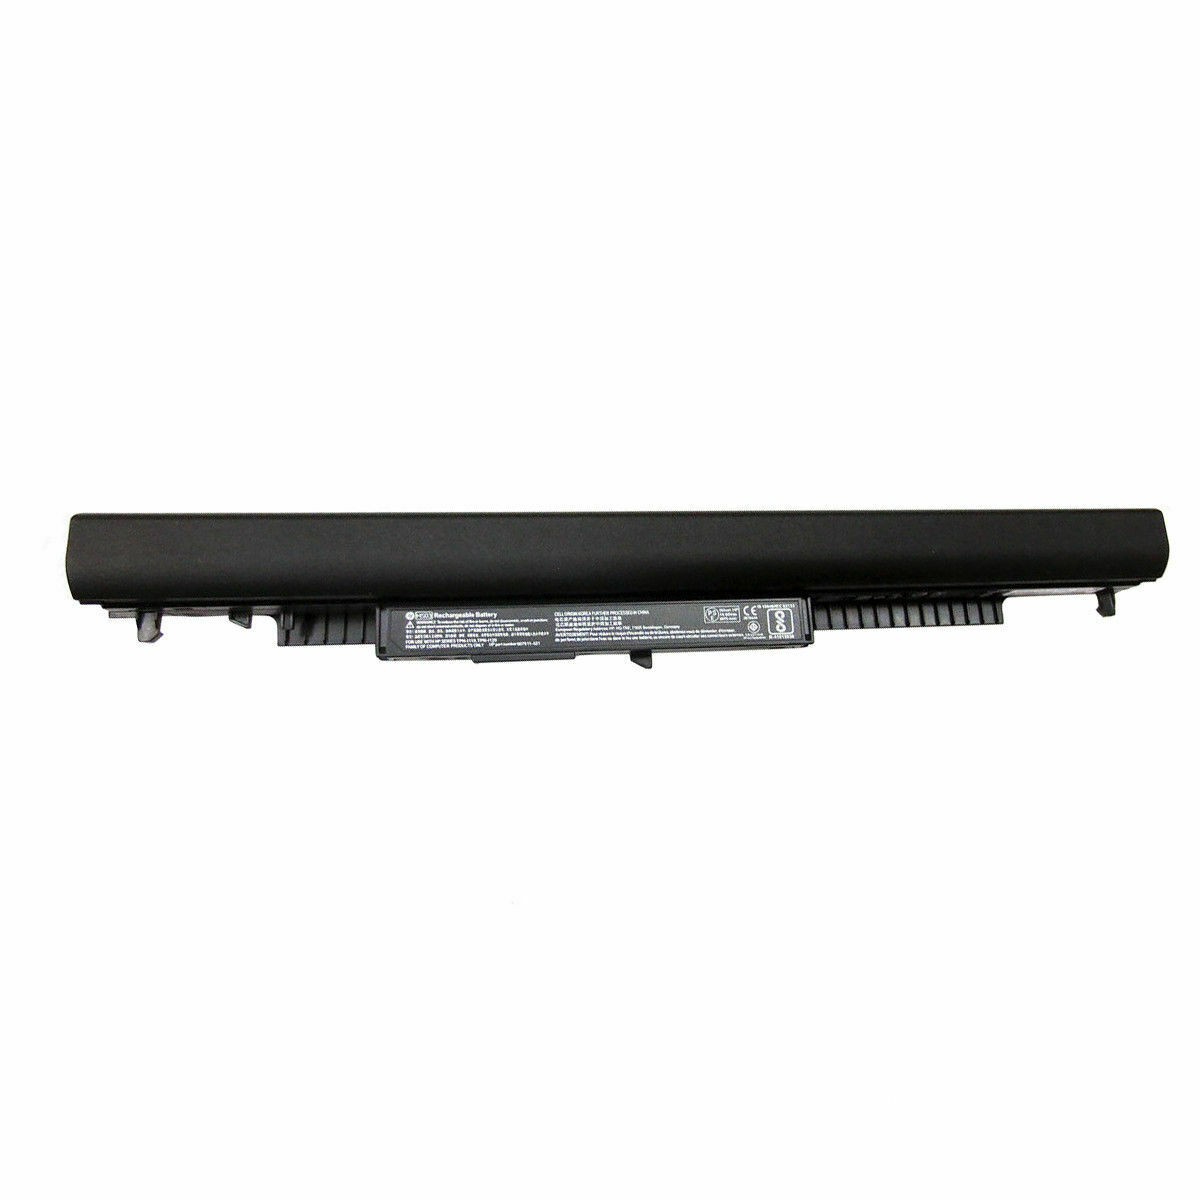 Genuine Battery HS04 HS04XL For HP 240 245 250 255 G4 G5 807957-001 807956-001